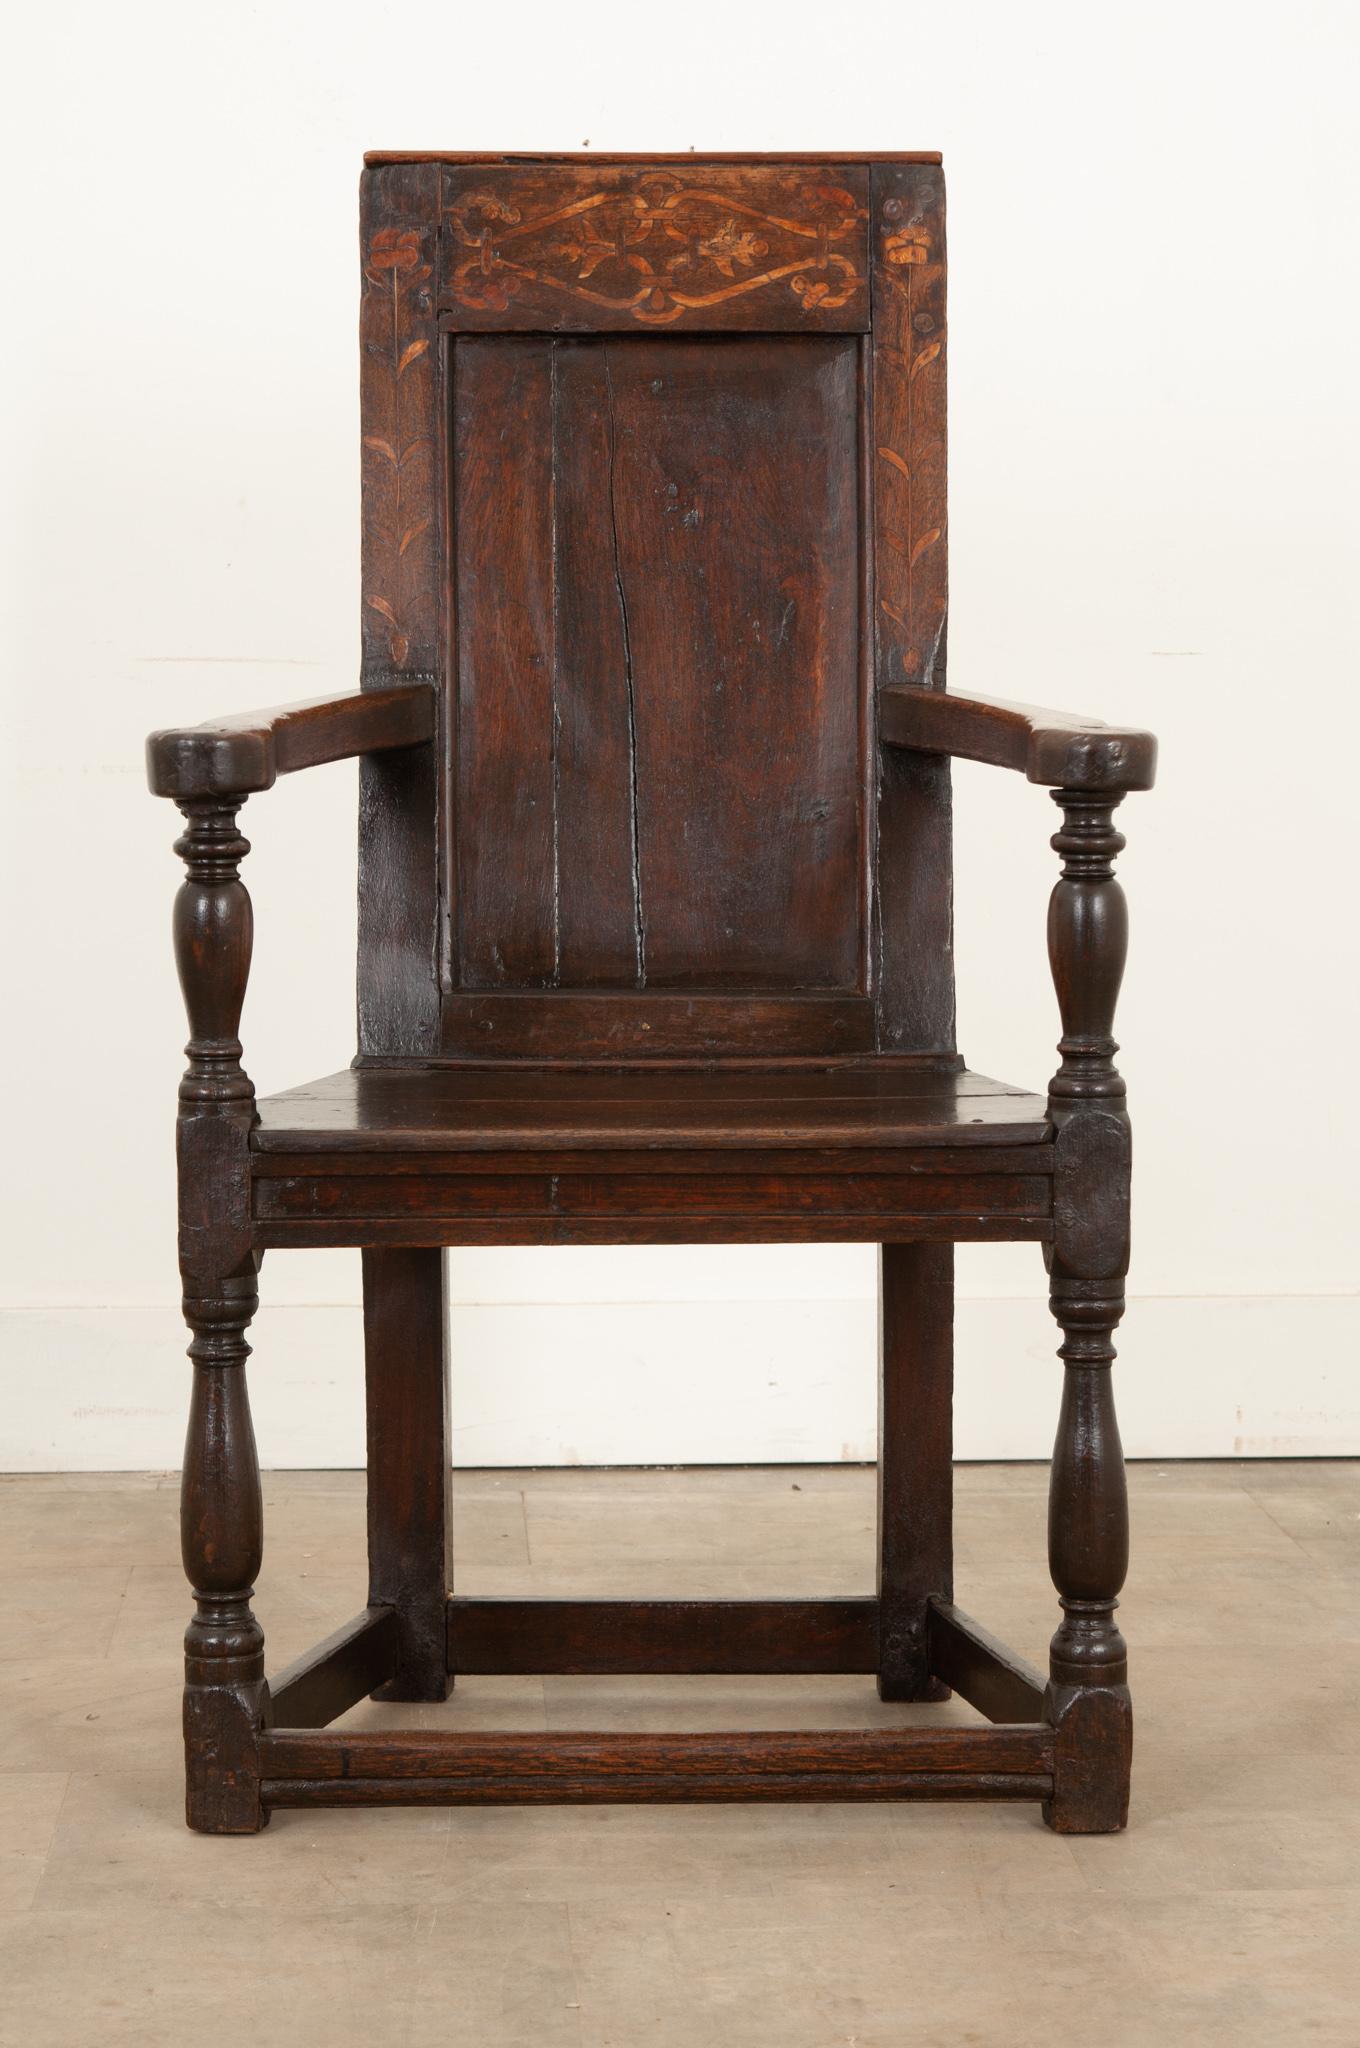 A rare and impressive 18th century English wainscot armchair hand-carved from solid oak. A highly decorative and original piece hand-crafted circa 1750 with inlaid floral and foliate motifs on a molded and trimmed back panel. Featuring smooth broad